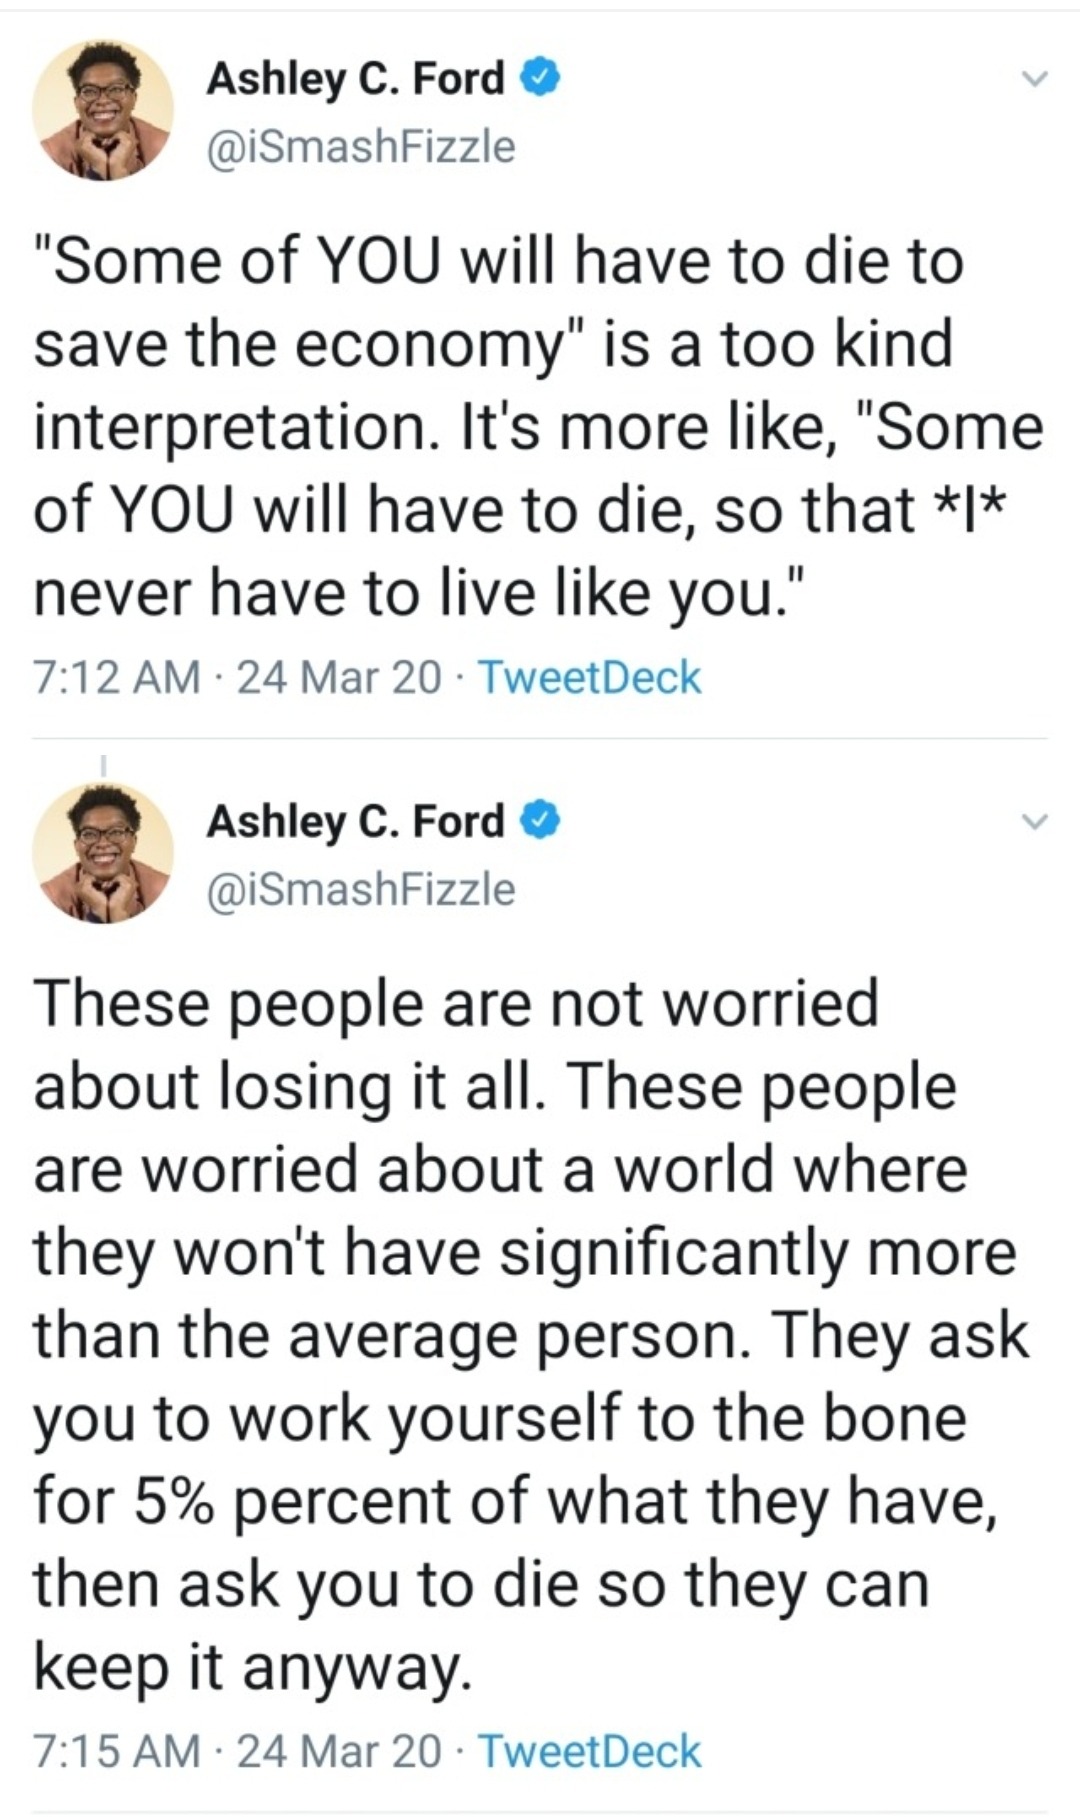 animal - Ashley C. Ford "Some of You will have to die to save the economy" is a too kind interpretation. It's more , "Some of You will have to die, so that | never have to live you." 24 Mar 20 TweetDeck Ashley C. Ford These people are not worried about lo